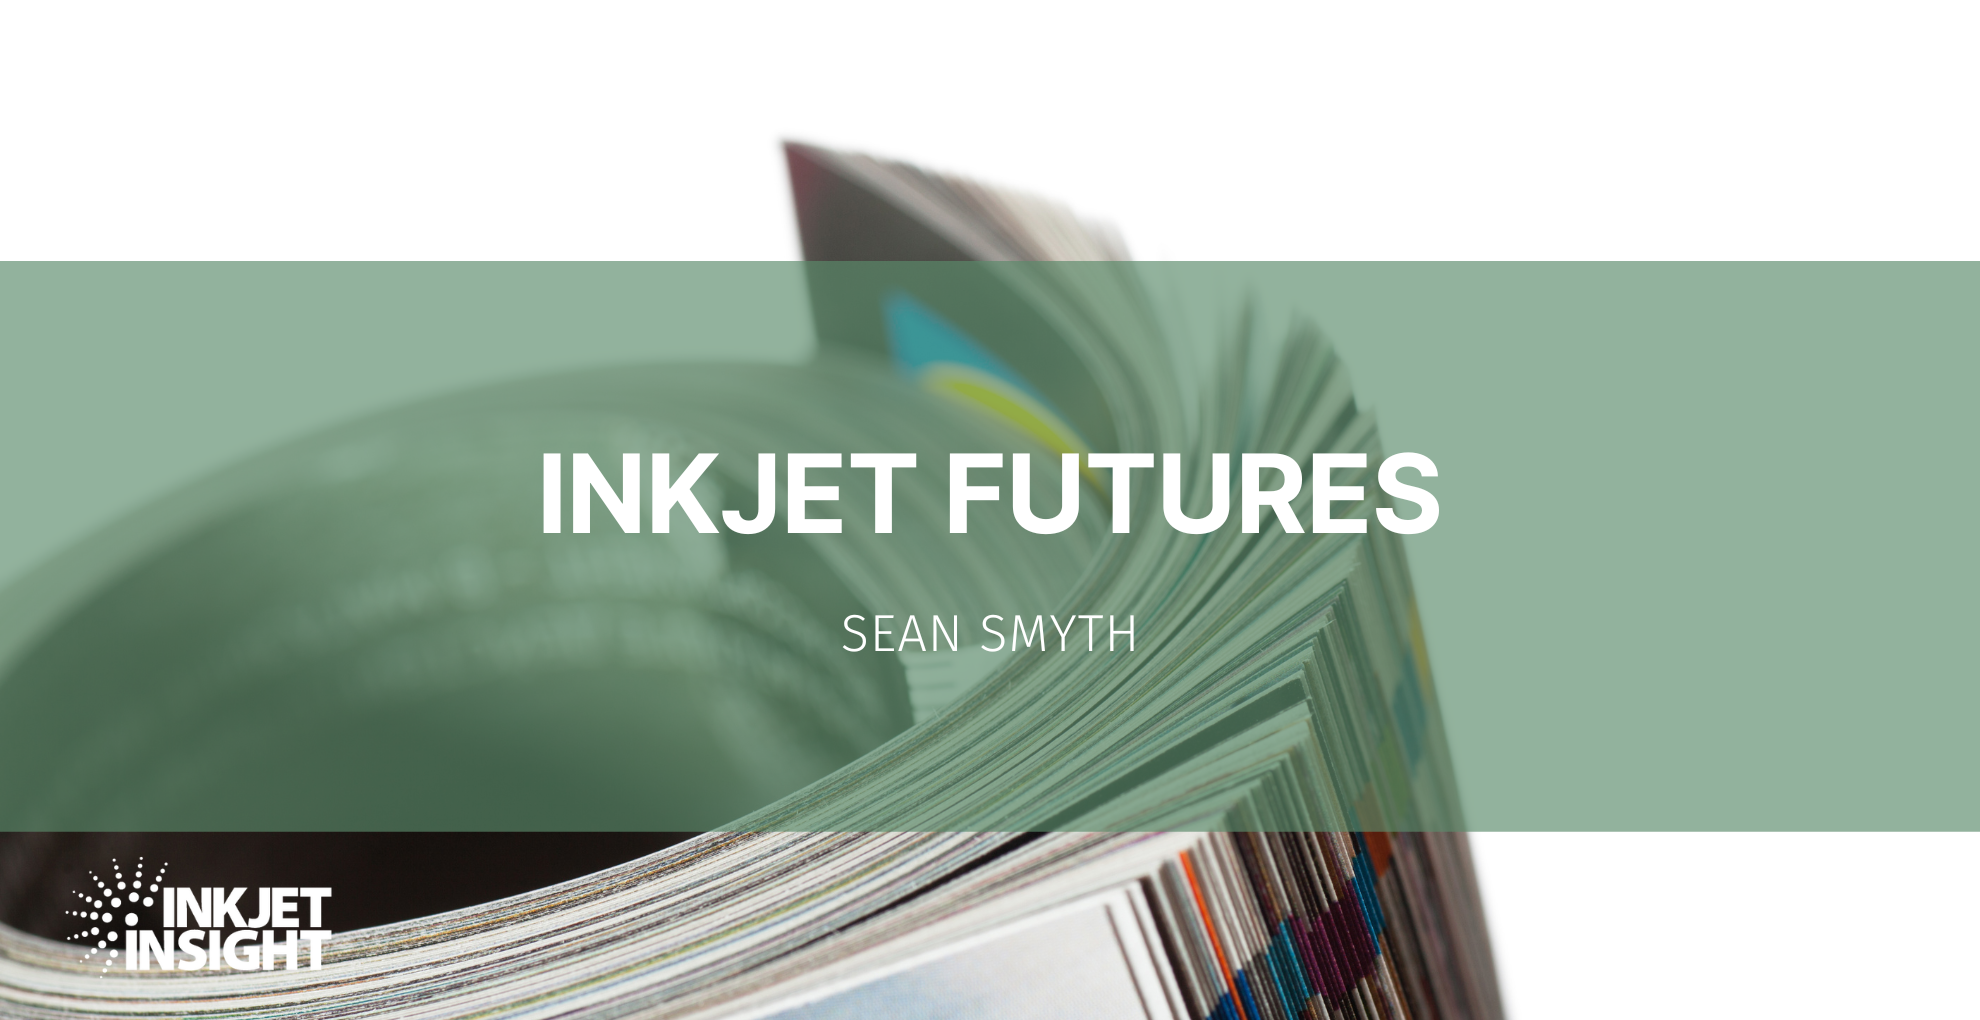 Featured image for “Inkjet Futures”